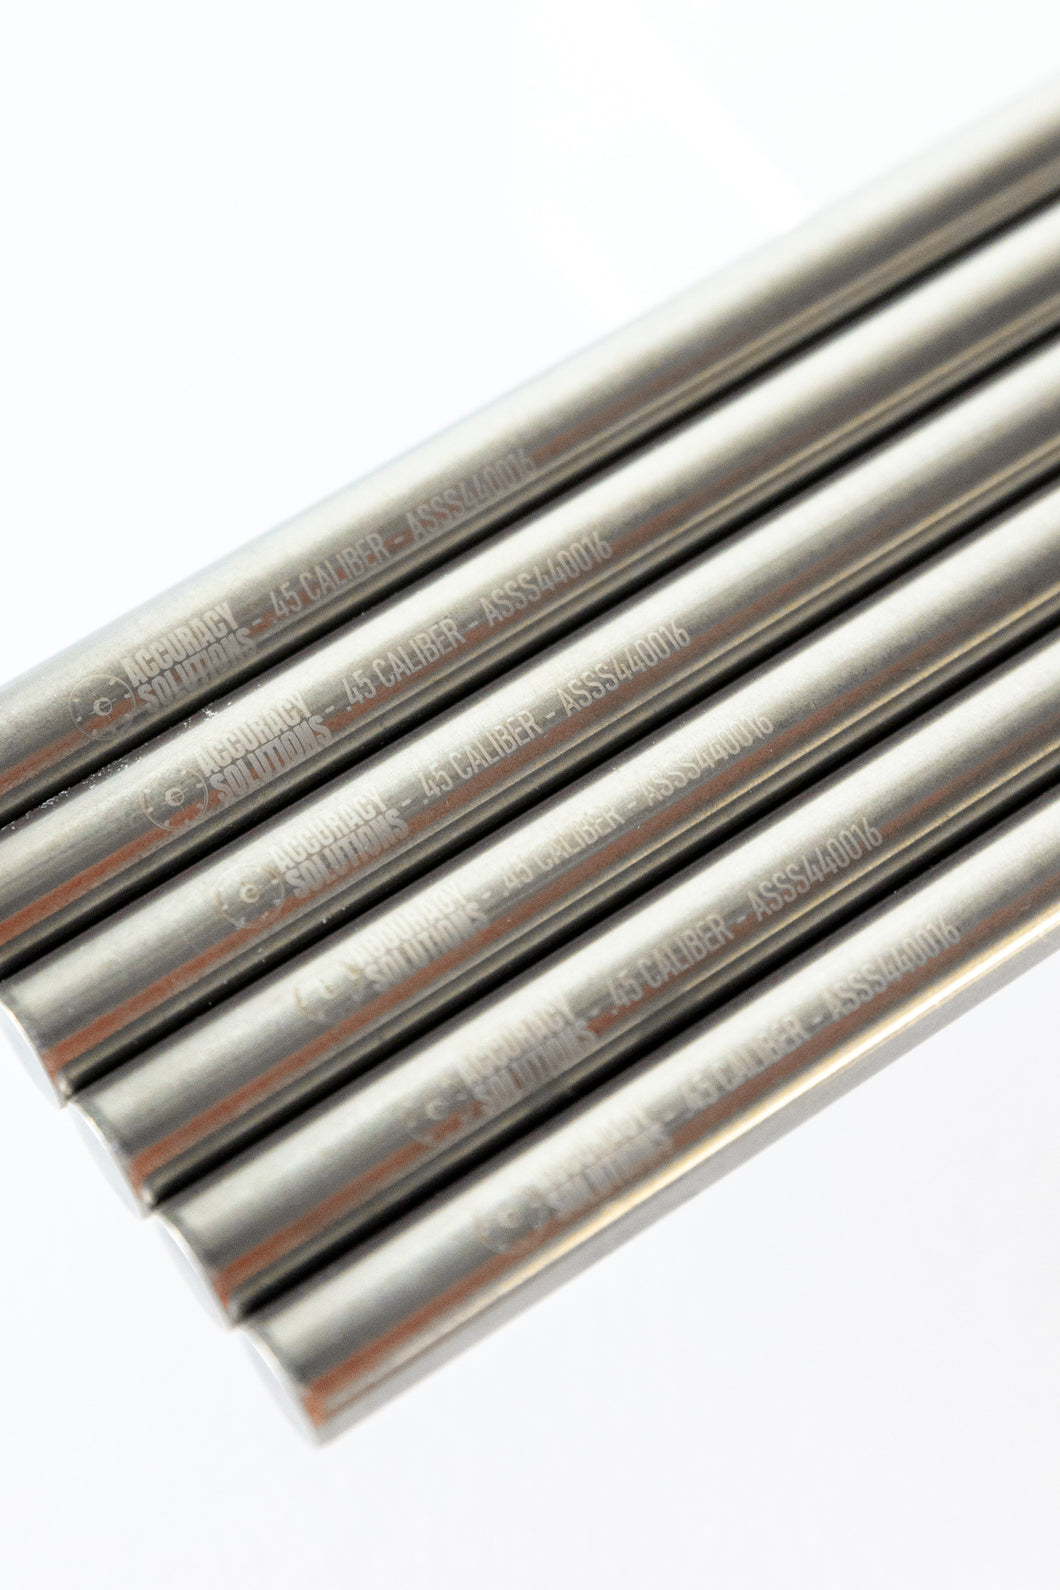 .45ACP Stainless Steel Bore Alignment Rod